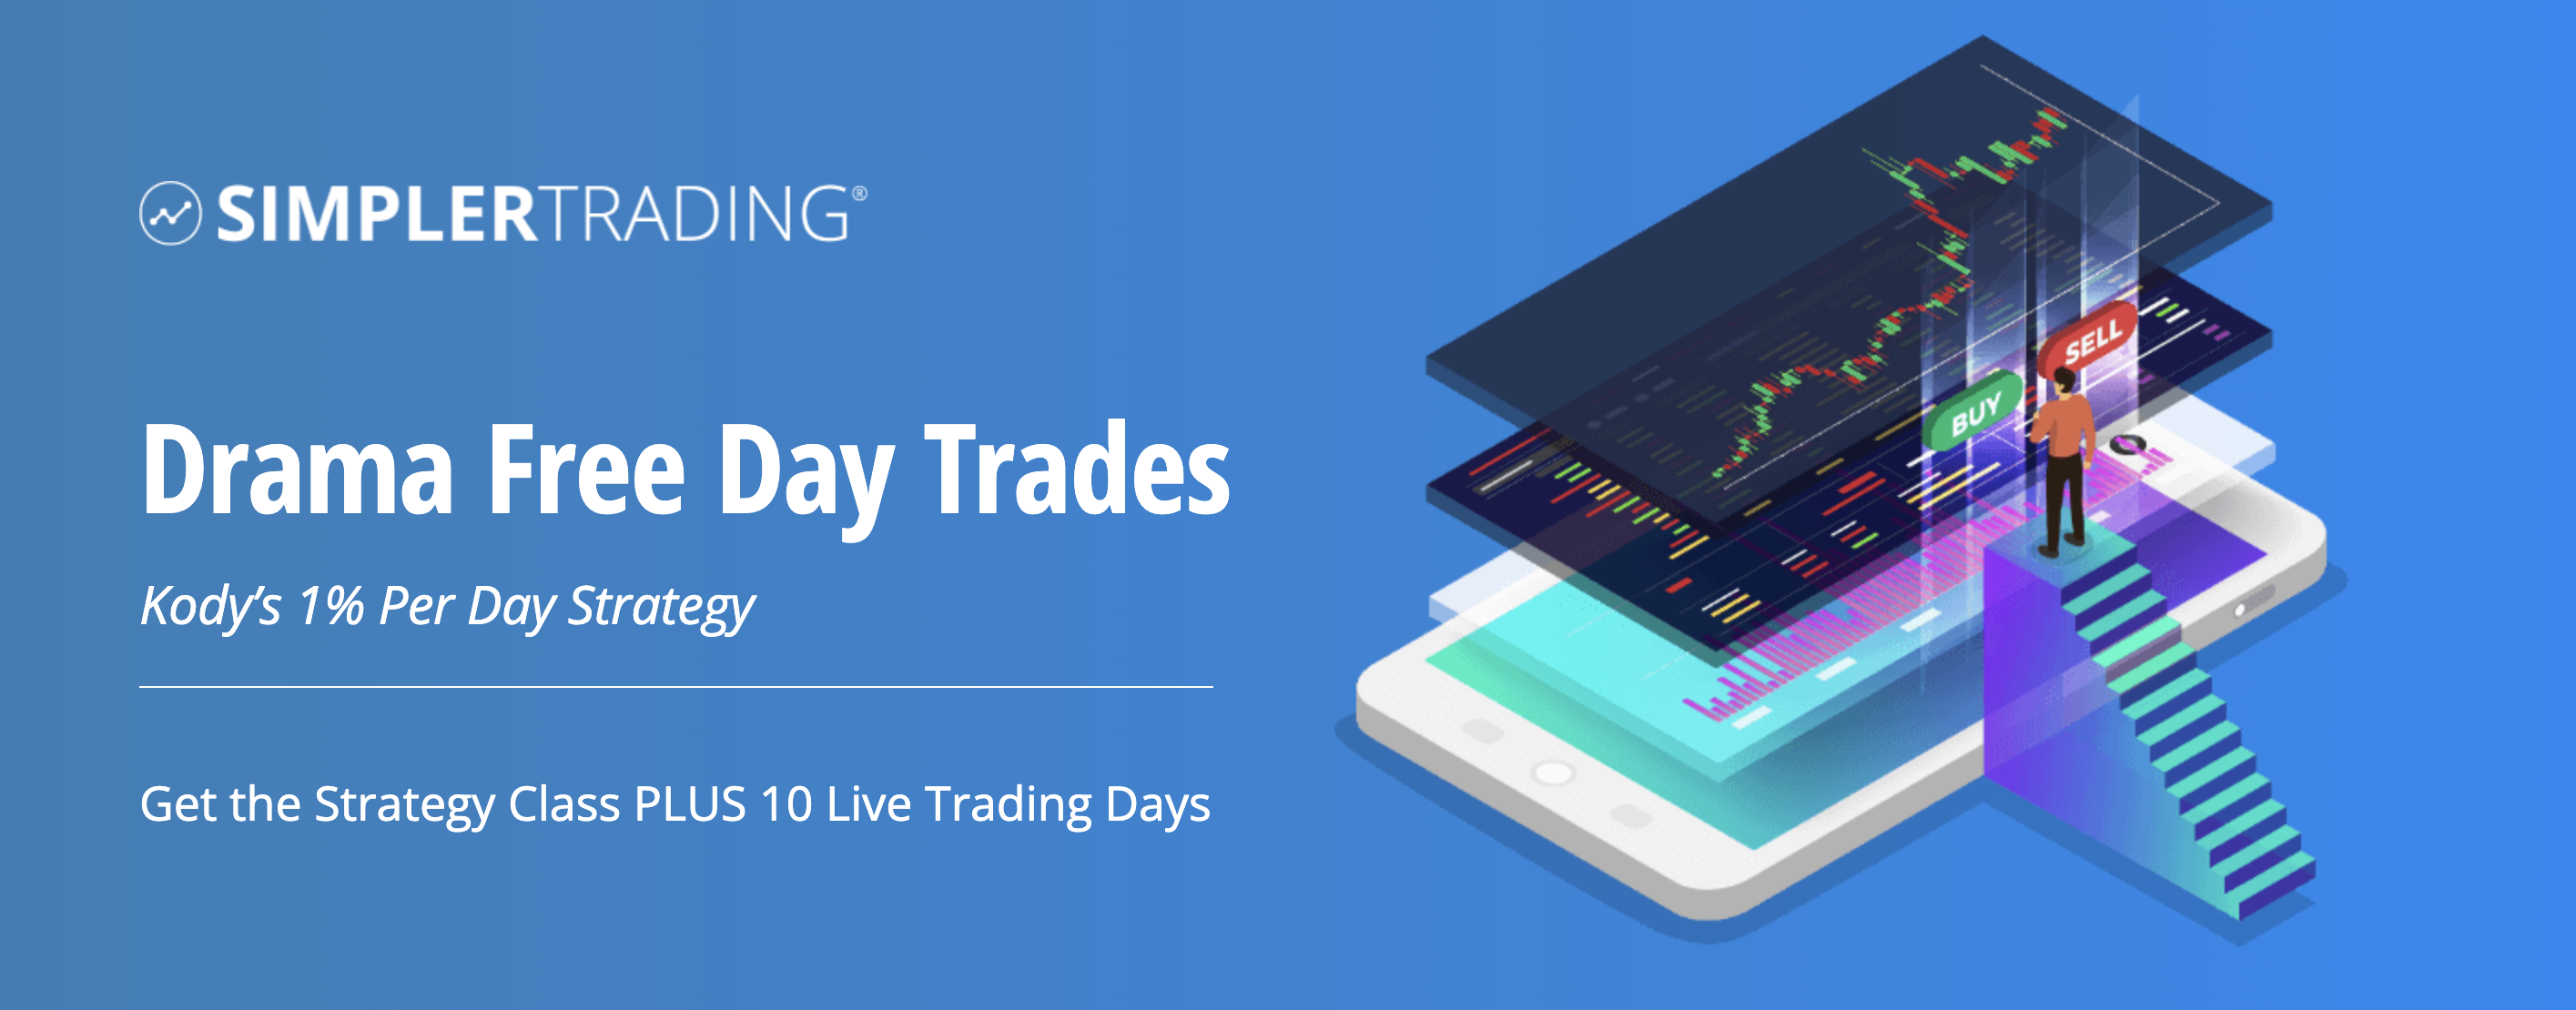 Drama Free Day Trades ELITE (Kody’s 1% Per Day Strategy) Basic Package - Simpler Trading